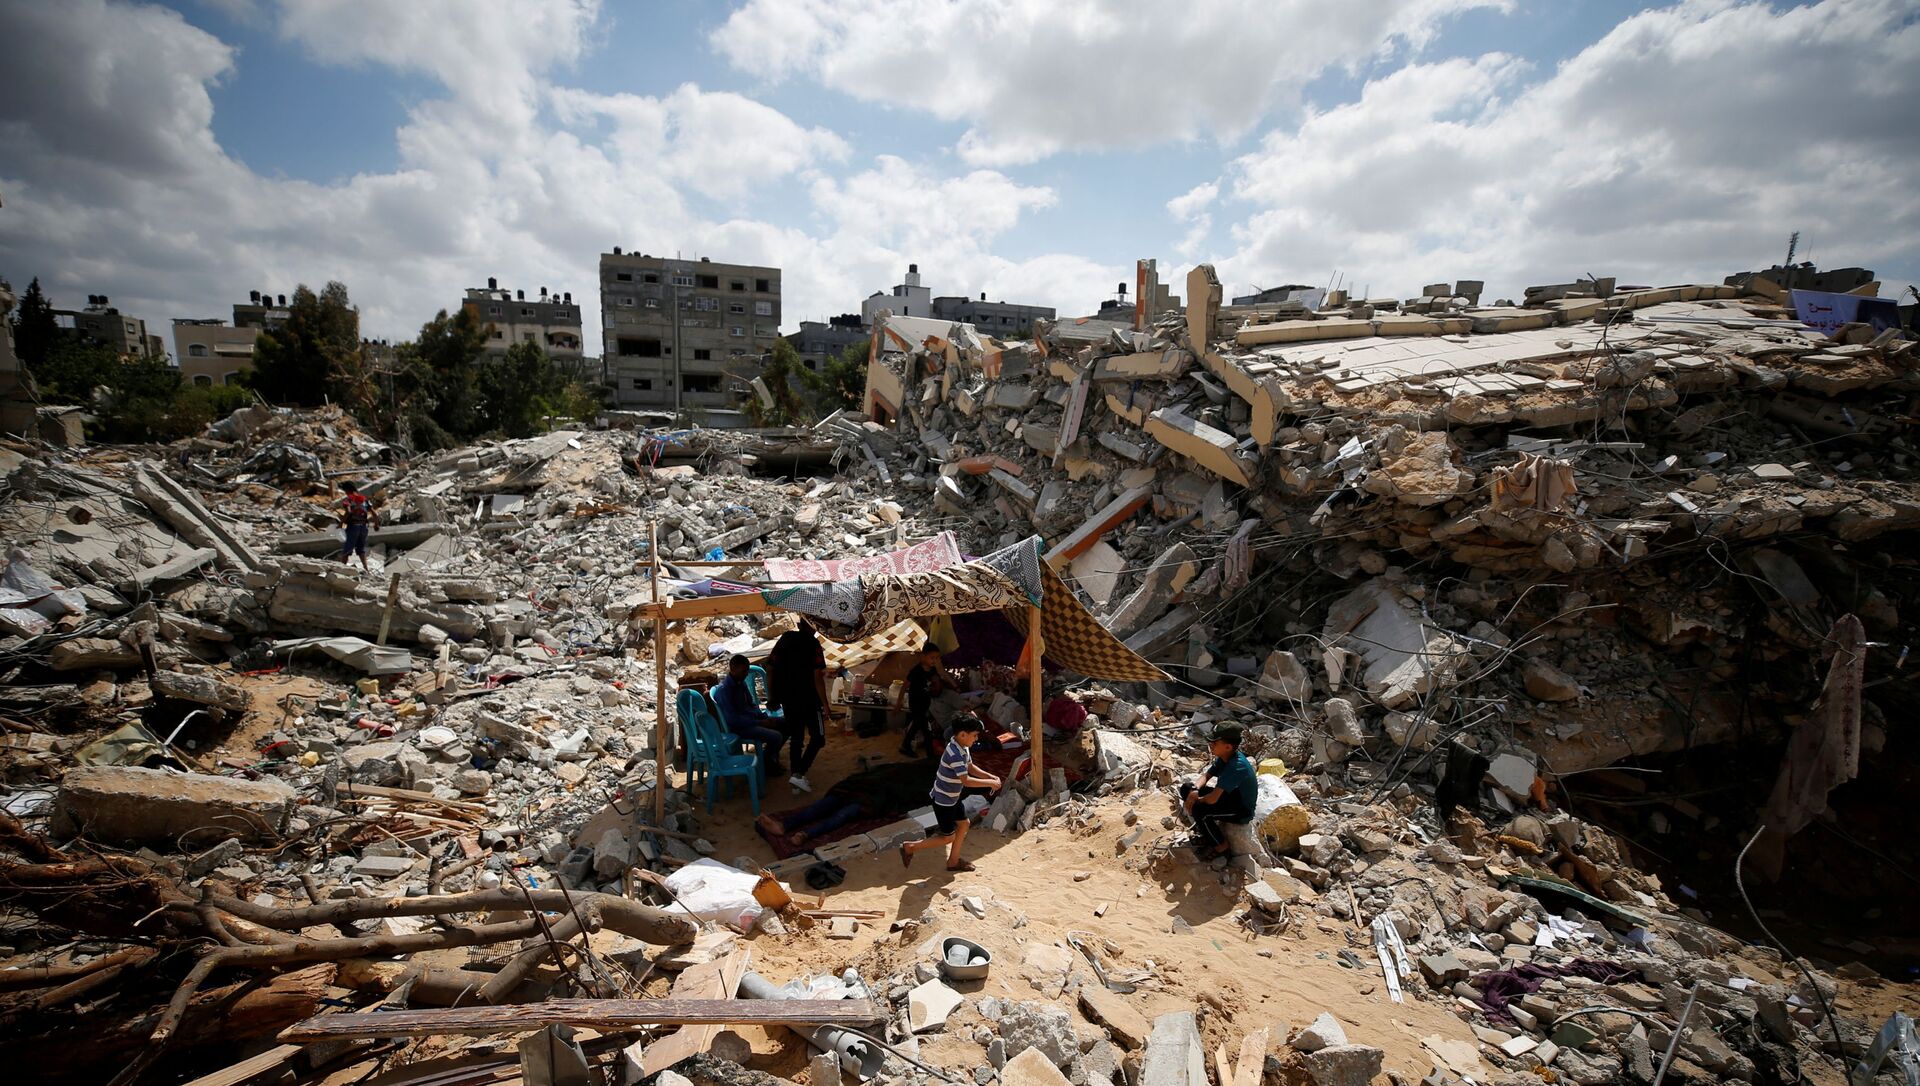 Palestinians sit in a makeshift tent amid the rubble of their houses which were destroyed by Israeli air strikes during the Israel-Hamas fighting in Gaza May 23, 2021. REUTERS/Mohammed Salem     TPX IMAGES OF THE DAY - Sputnik International, 1920, 23.05.2021